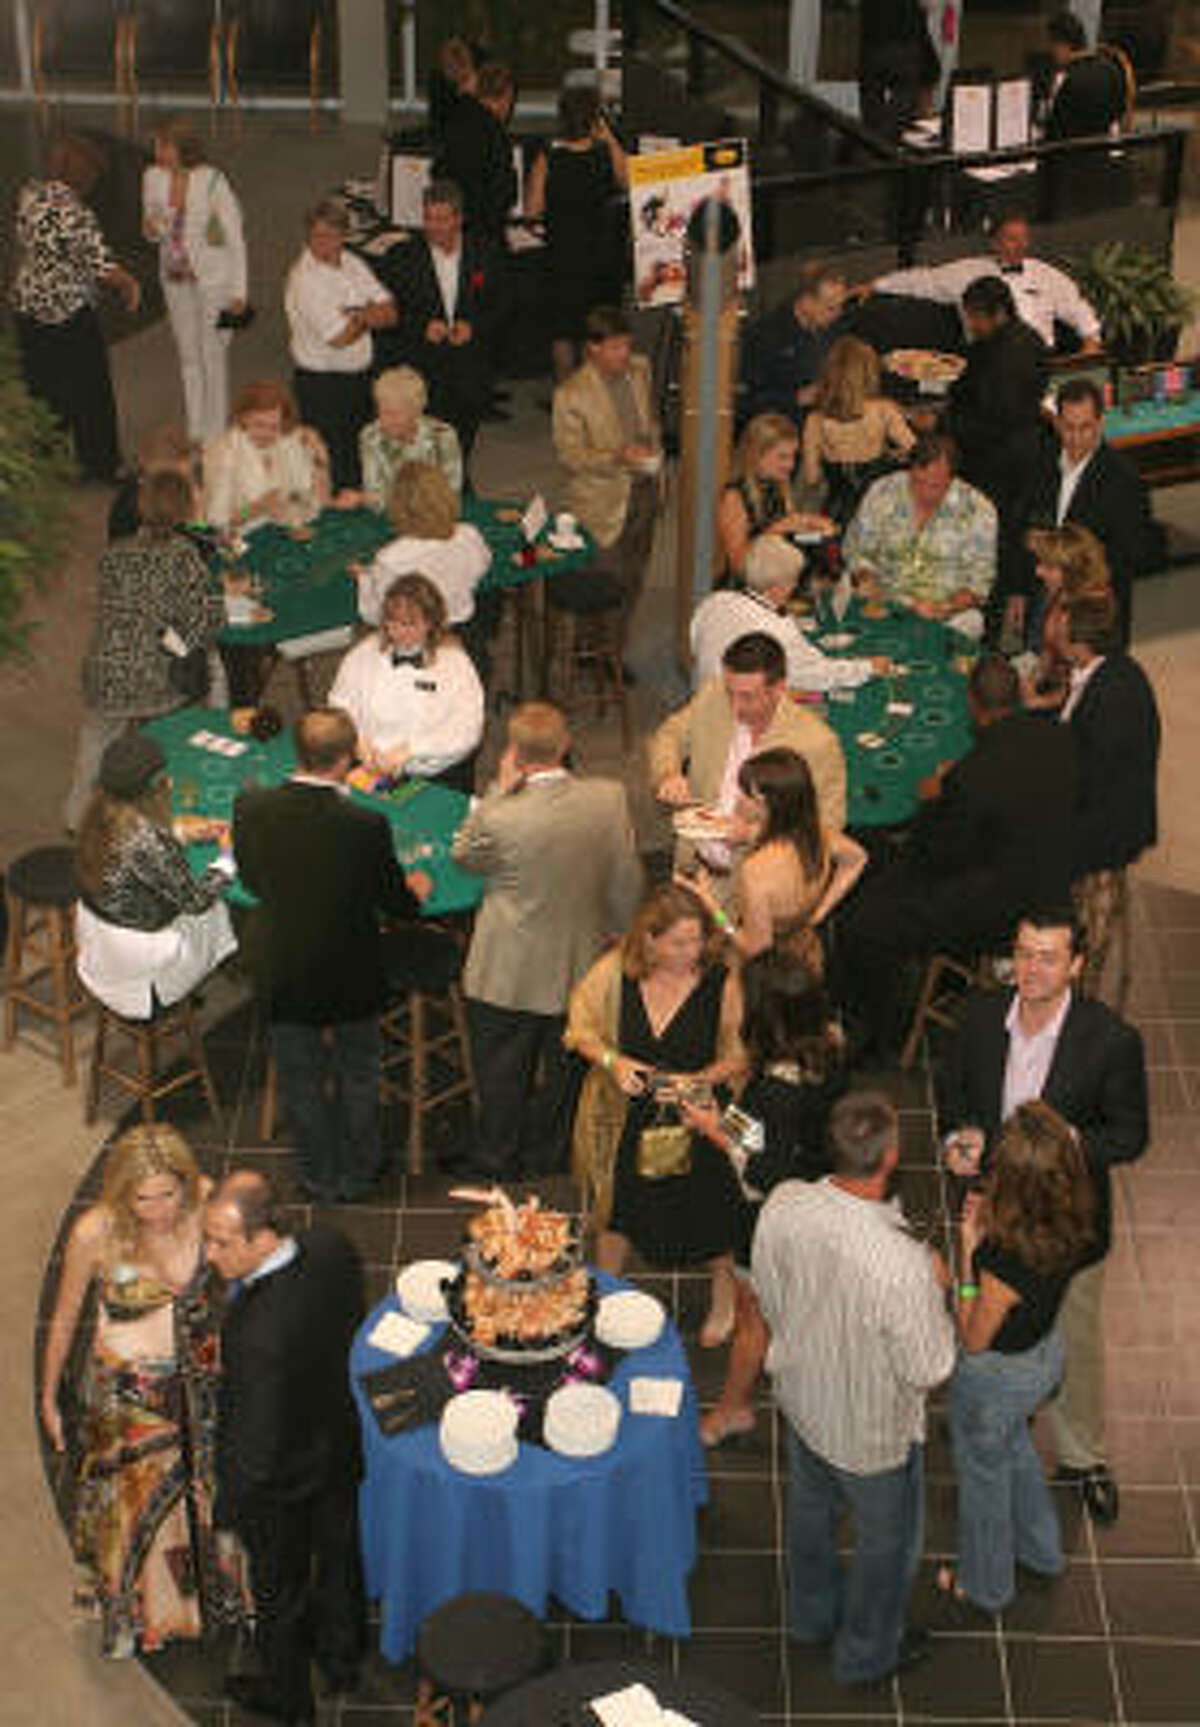 With the jazzy cars removed, the showroom at Momentum Audi made the perfect setting for gaming tables and food stations for the Health Museum Casino Night benefit.